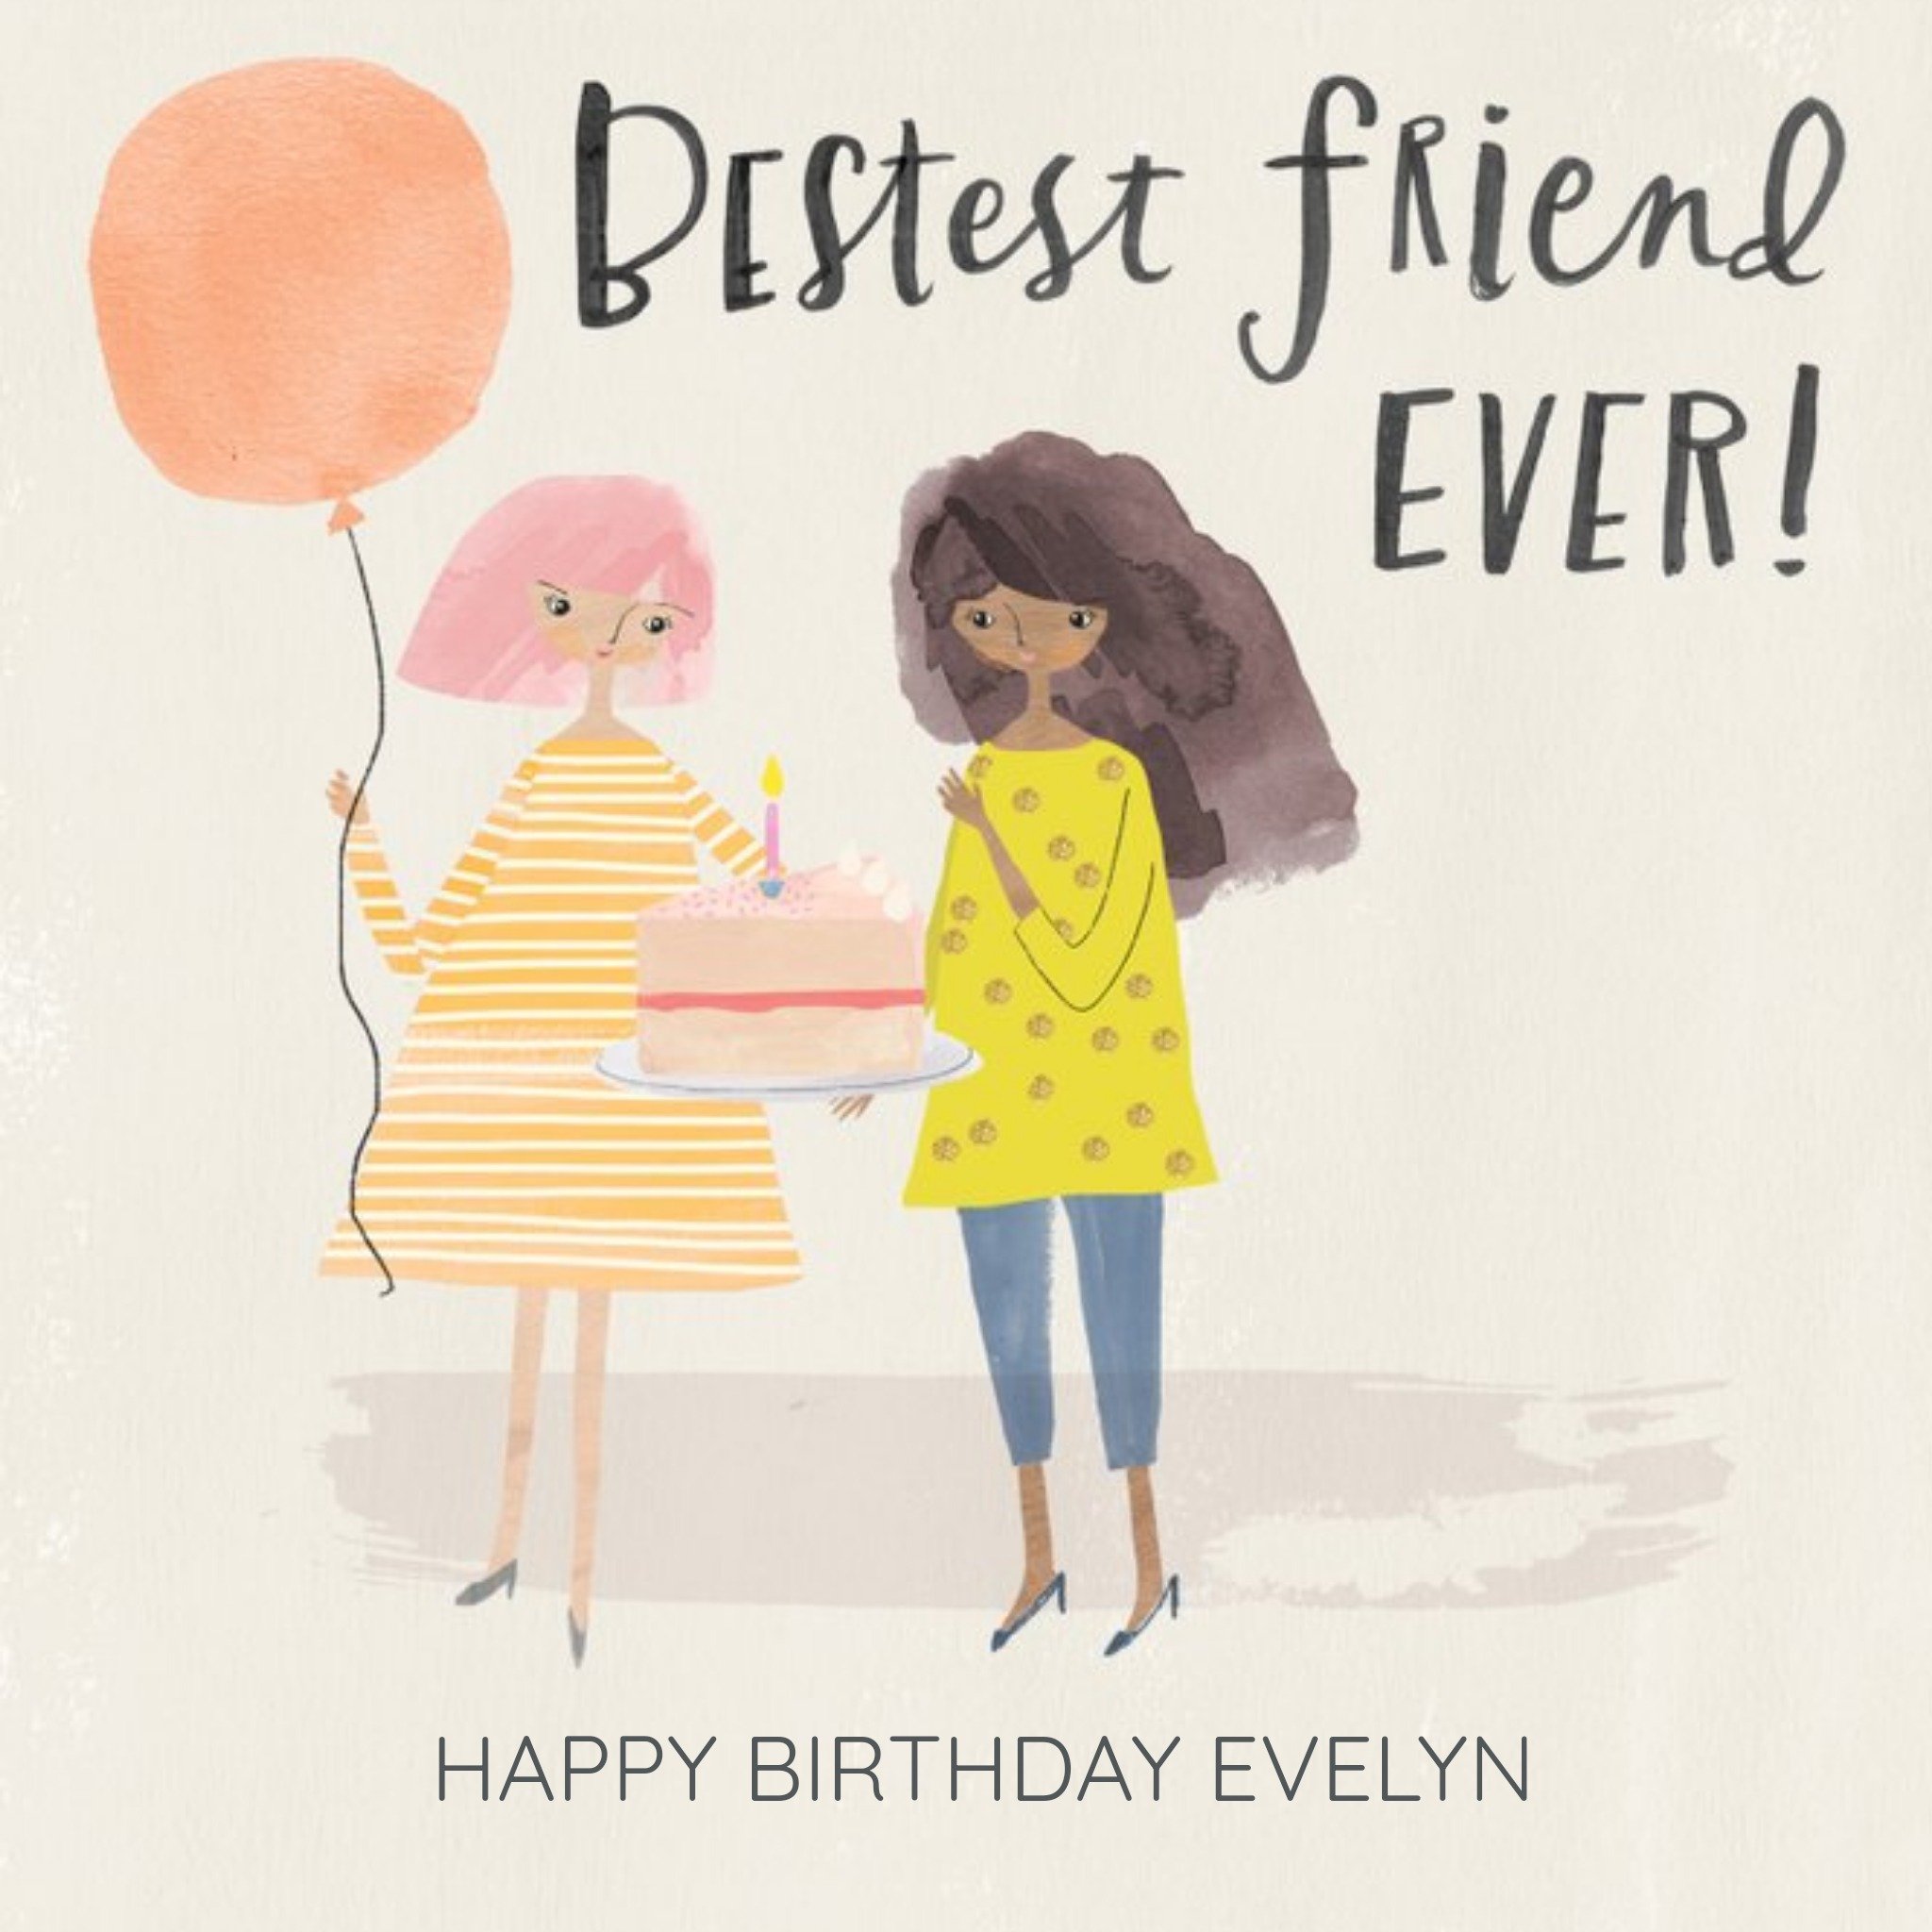 Moonpig Pigment Hey Girl Character Bestest Friend Ever Birthday Card, Large